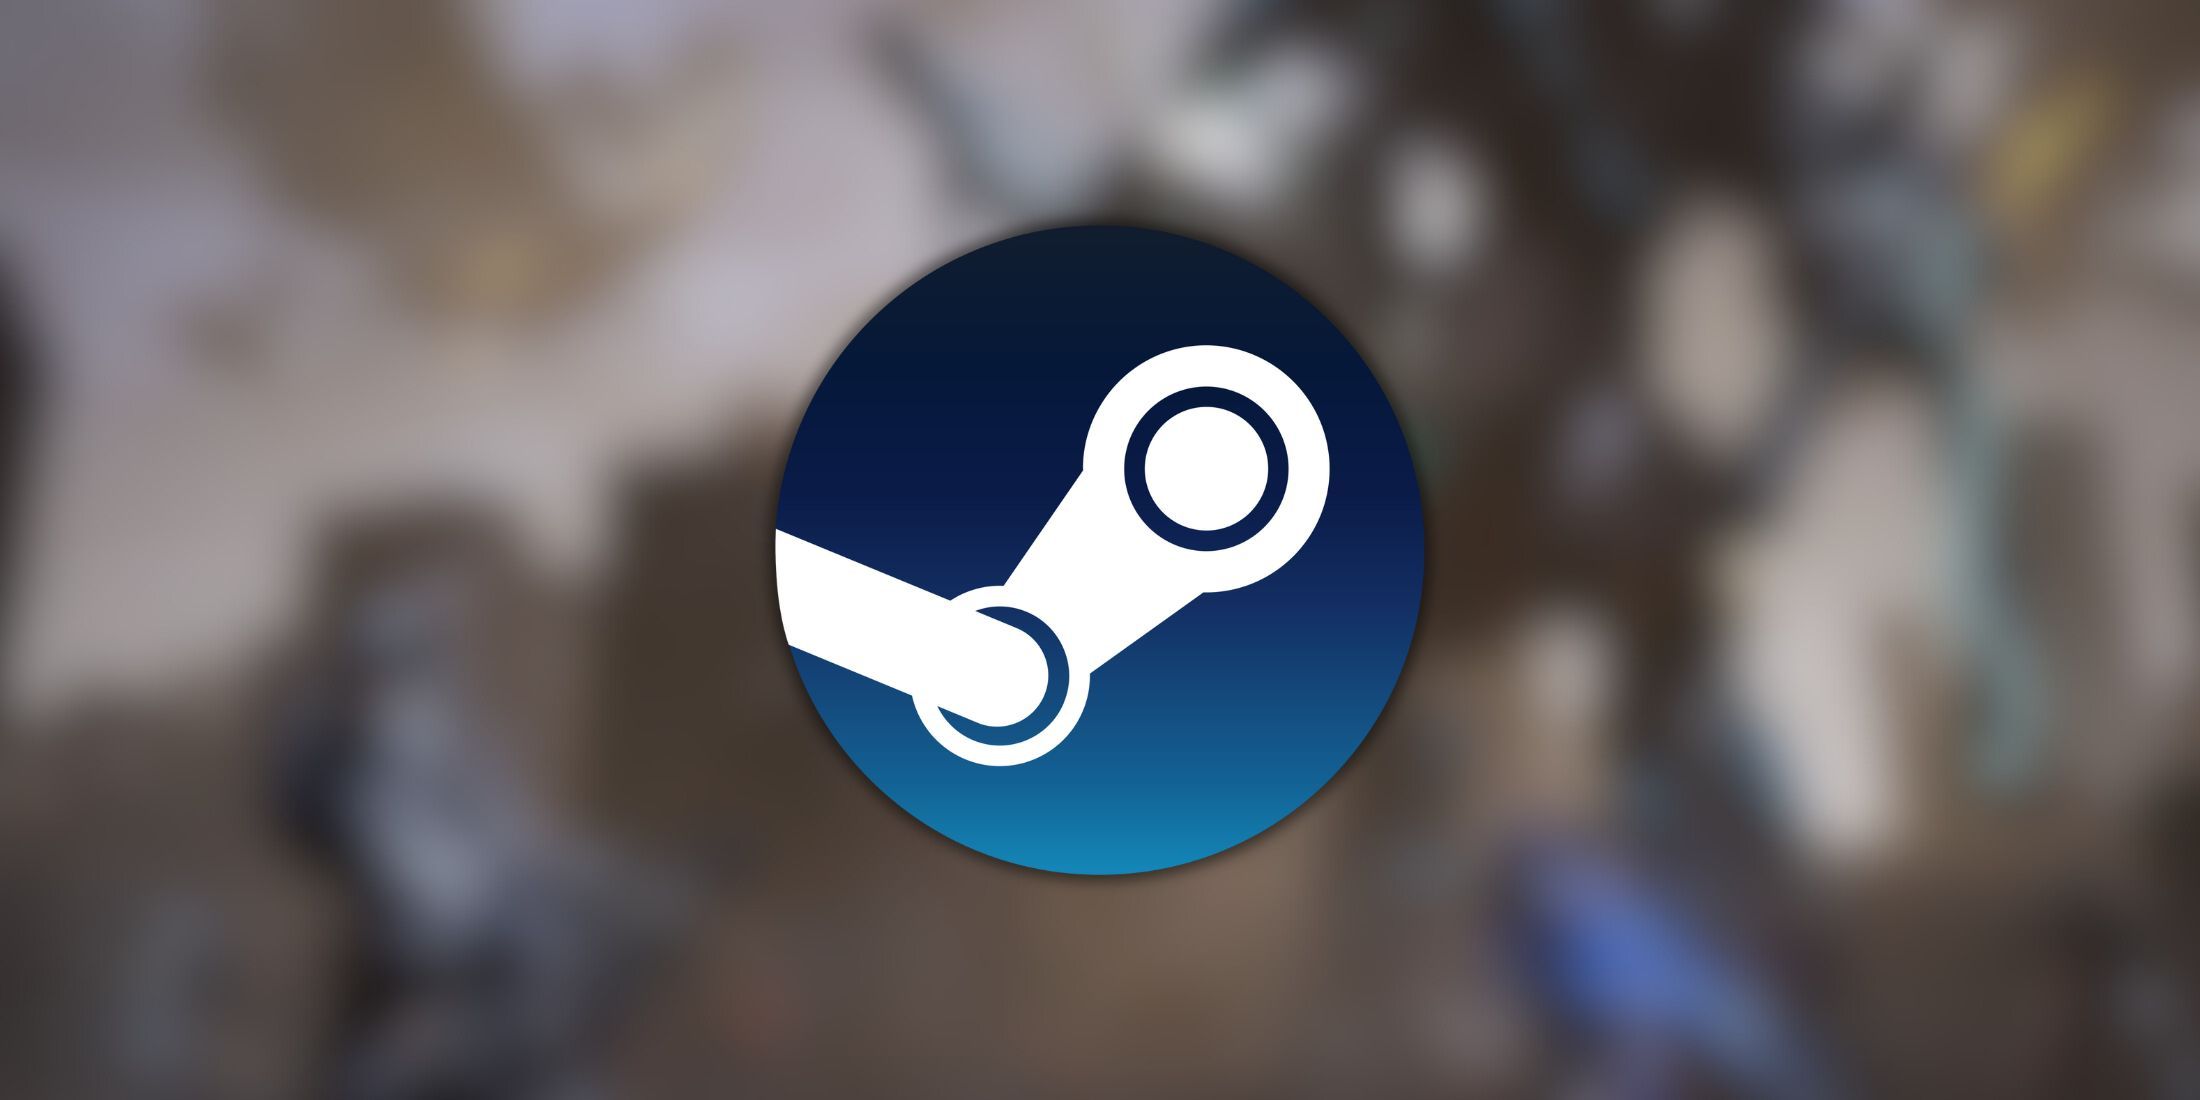 A free-to-play game has attracted a huge number of players on Steam just hours after launch.